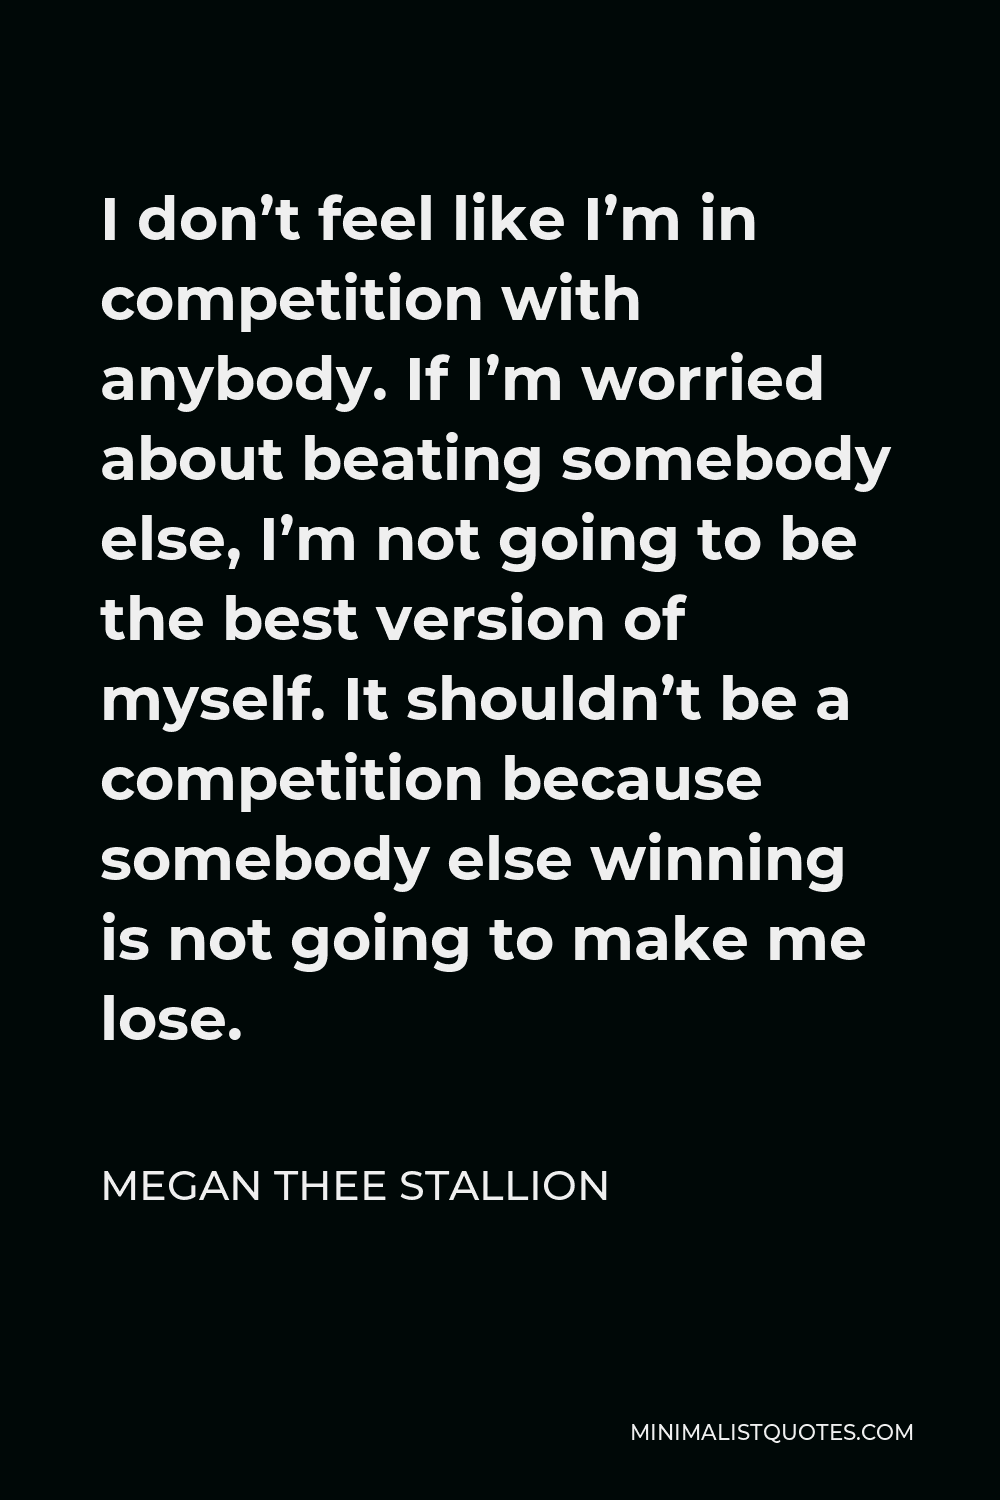 Megan Thee Stallion Quote I Don T Feel Like I M In Competition With Anybody If I M Worried About Beating Somebody Else I M Not Going To Be The Best Version Of Myself It Shouldn T